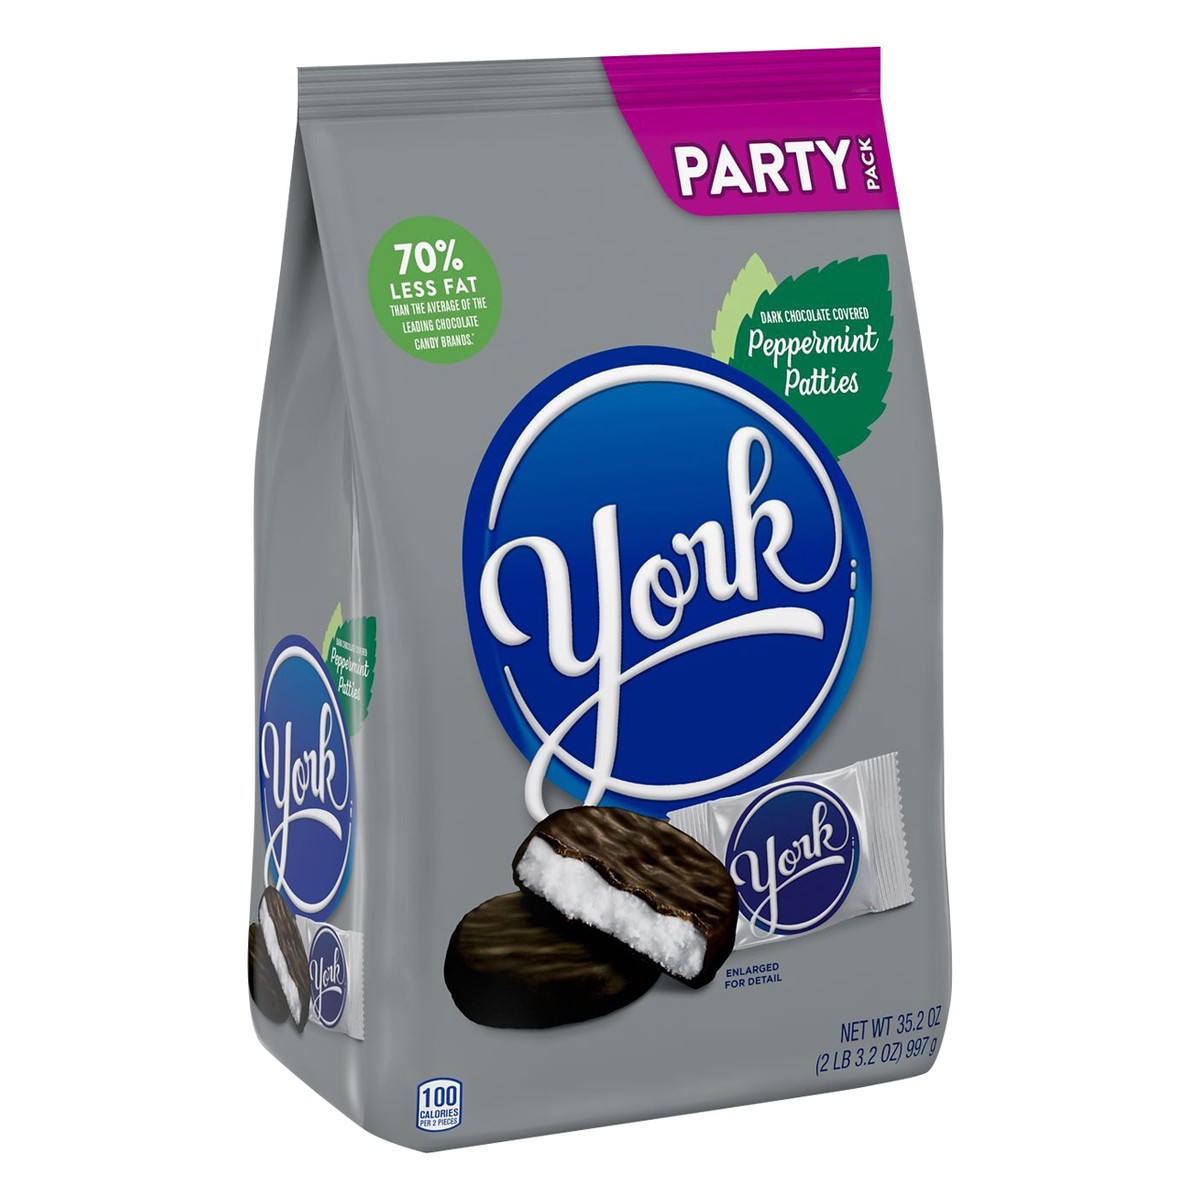 slide 7 of 7, YORK Dark Chocolate Peppermint Patties, Candy Party Pack, 35.2 oz, 35.2 oz